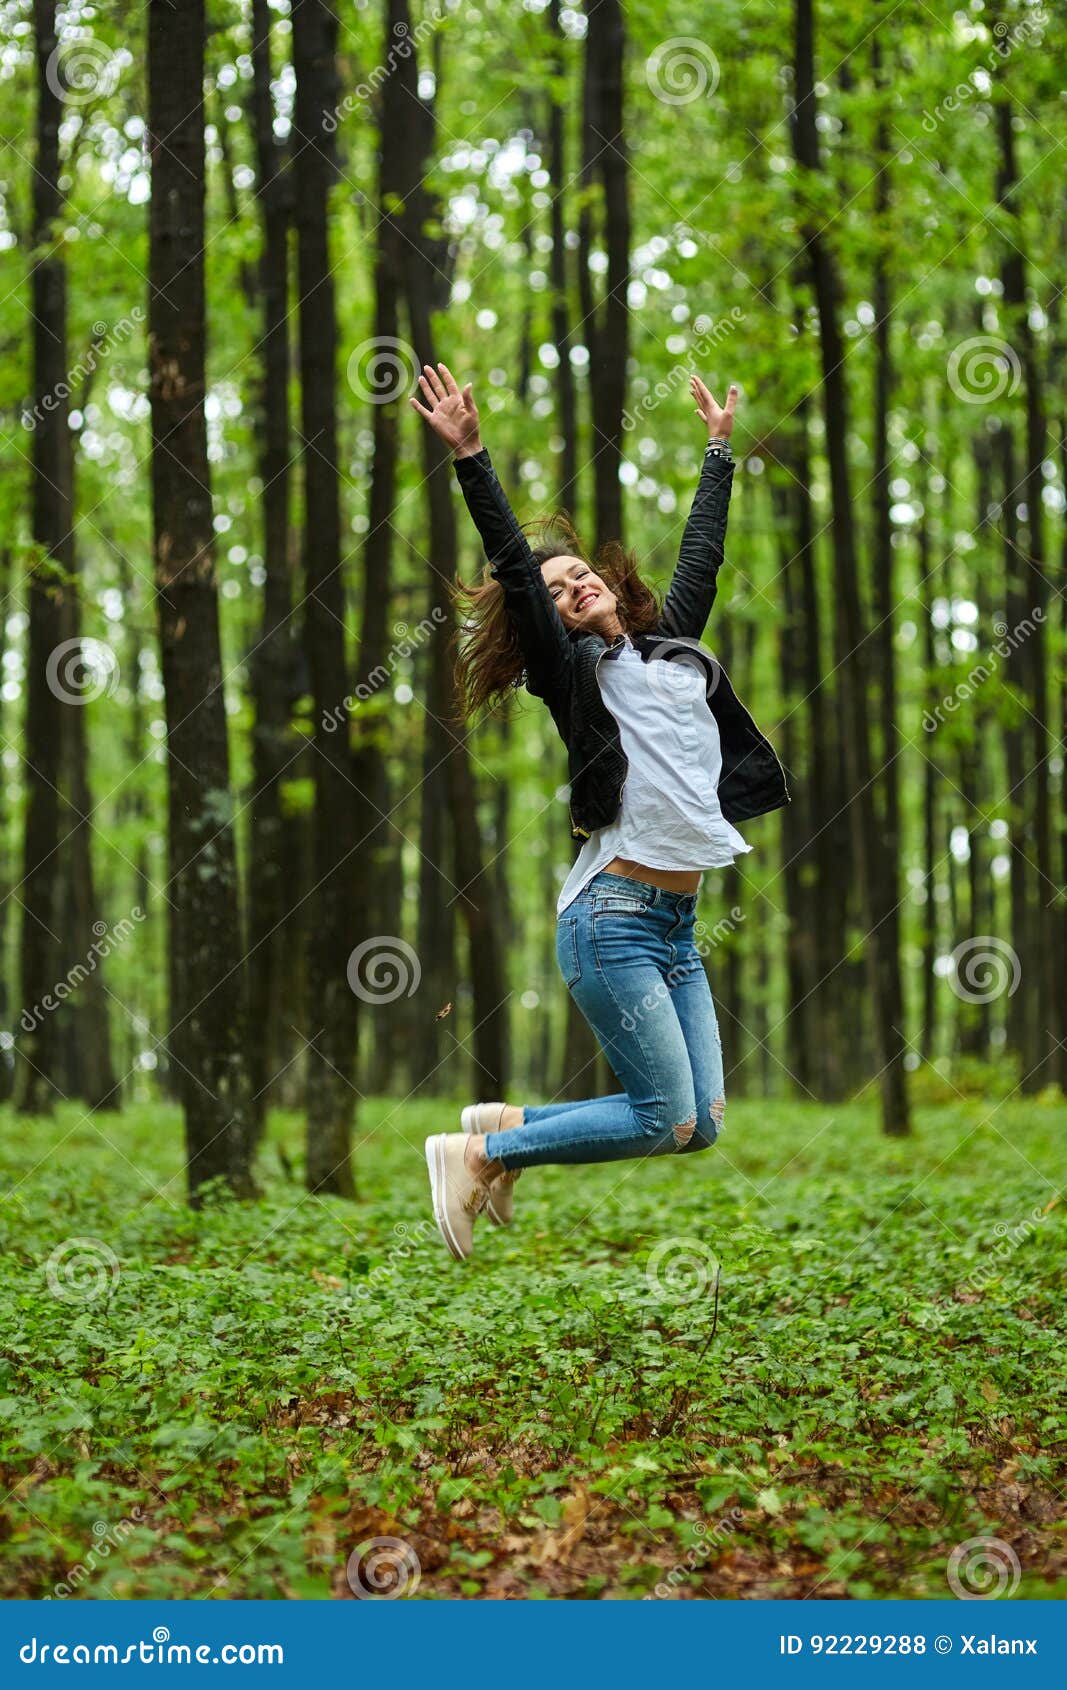 Woman Jumping For Joy Stock Photo Image Of Carefree 92229288